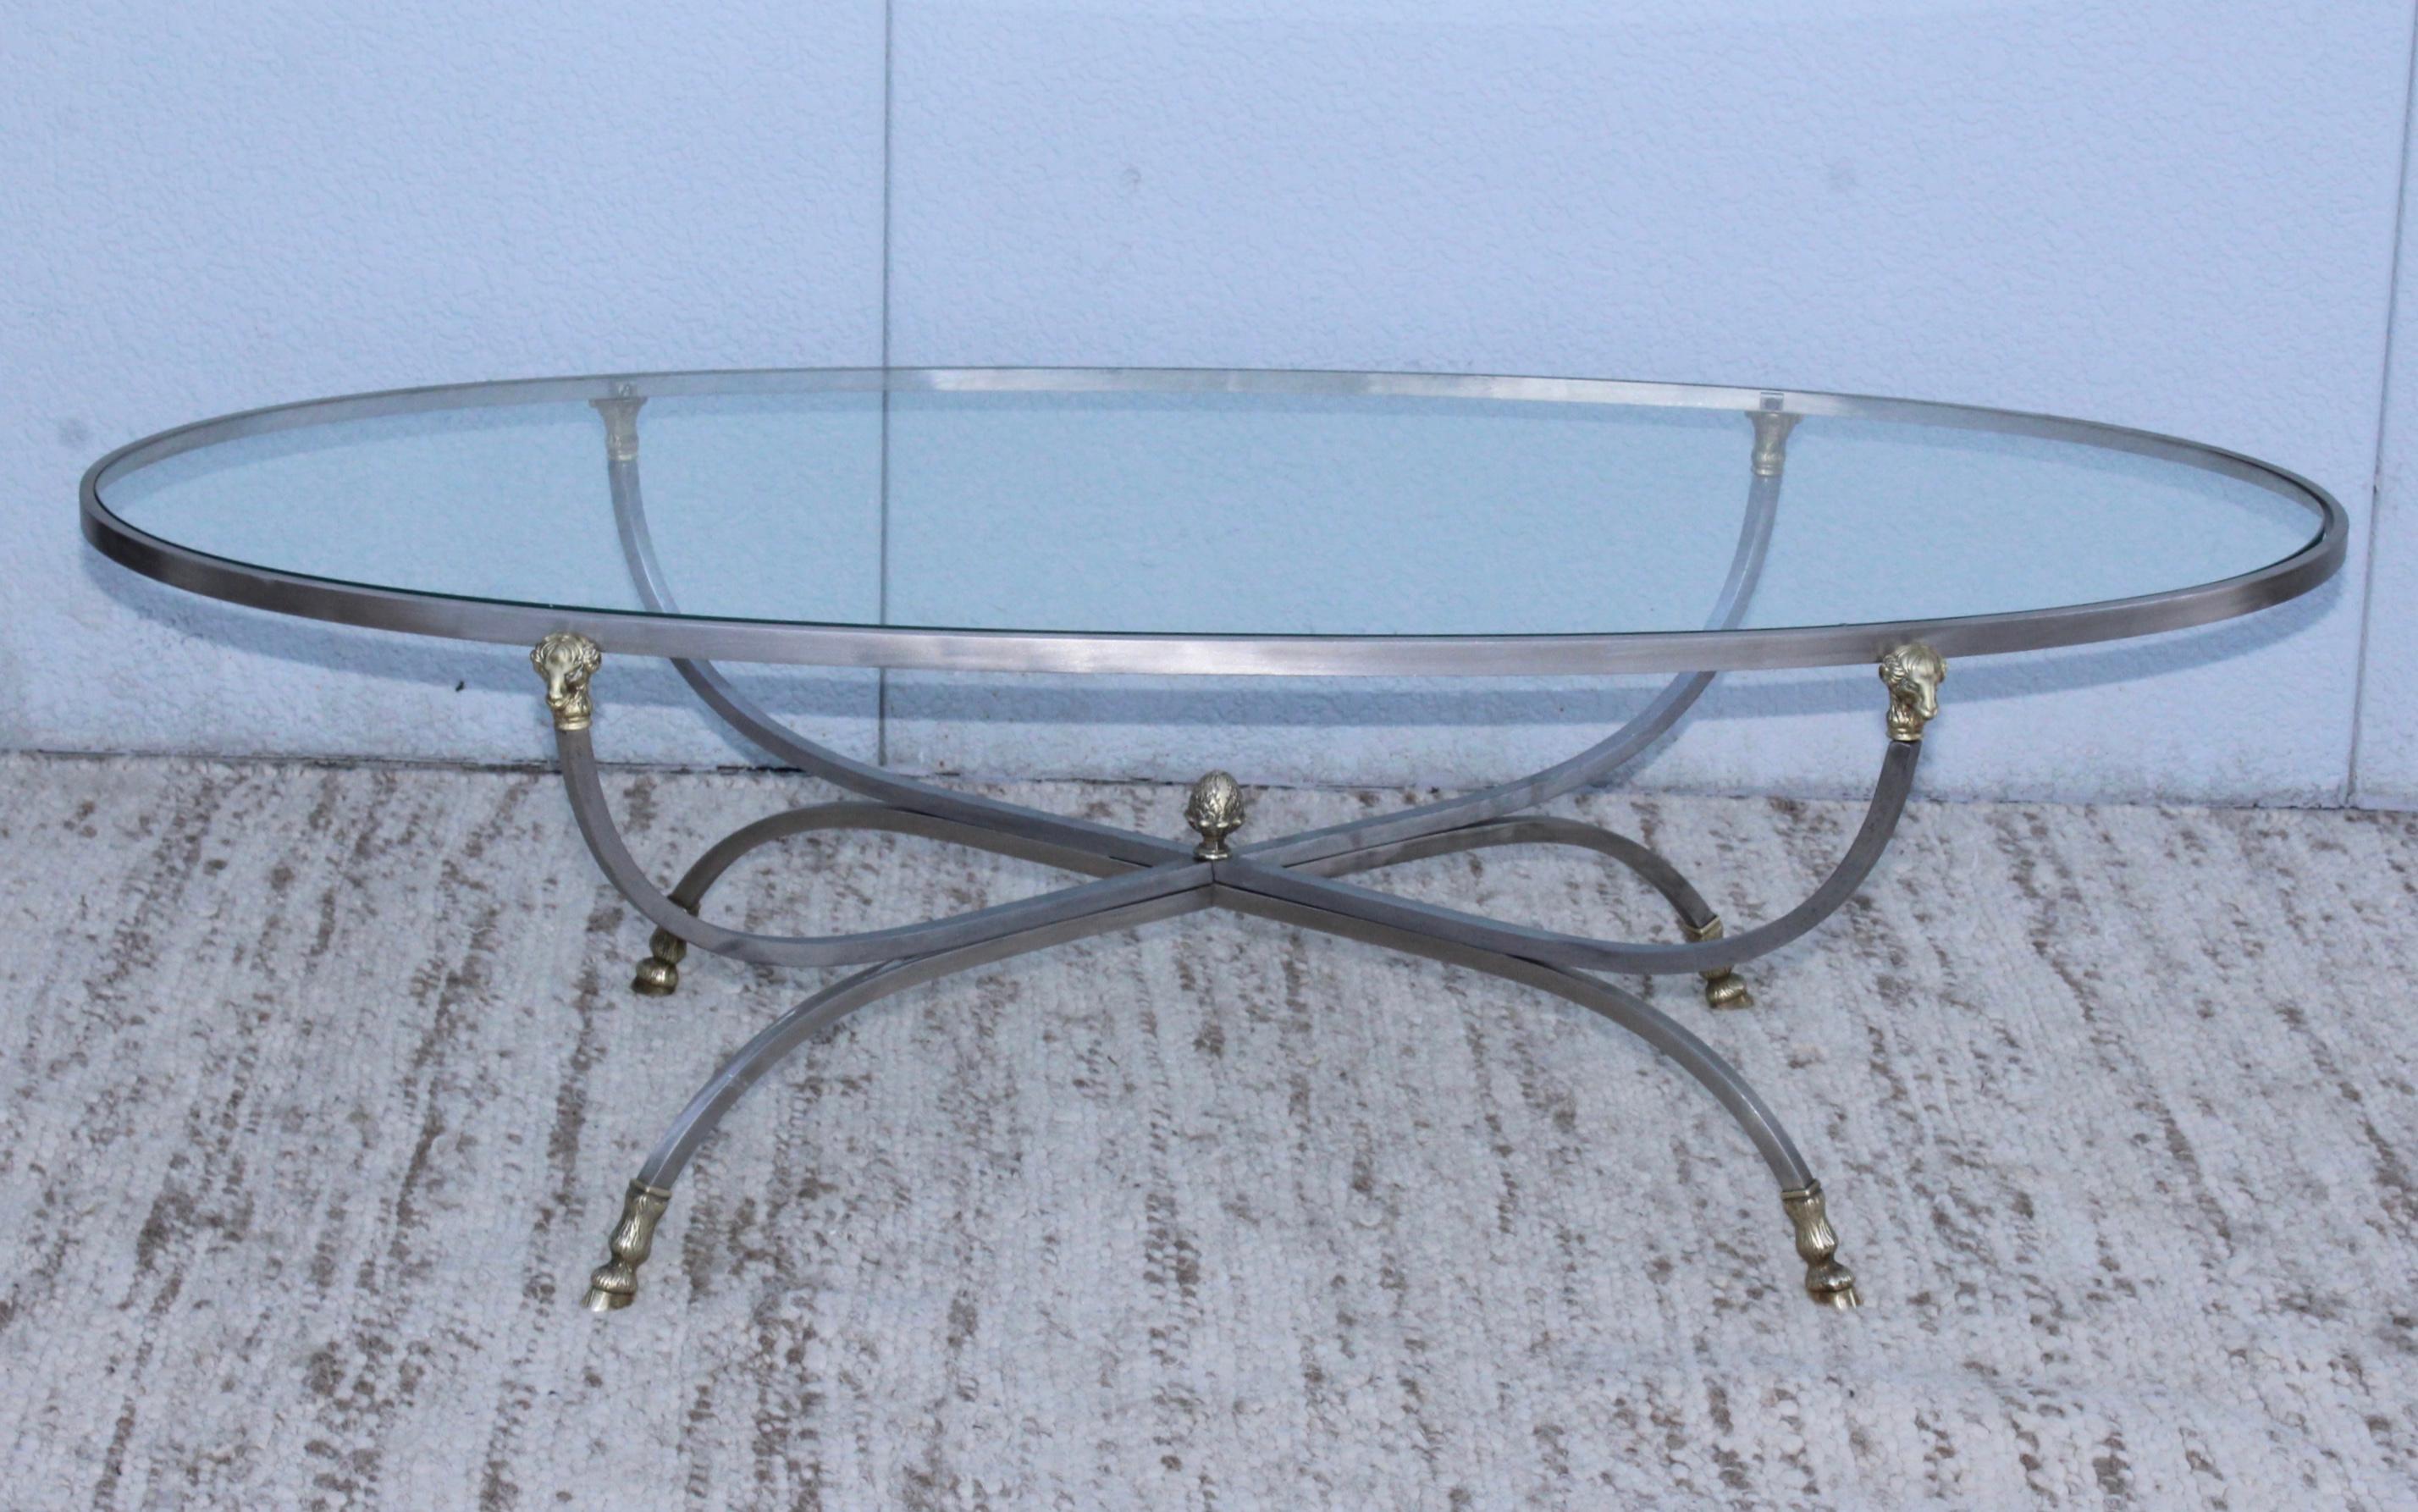 1960s modern steel frame with brass ram's head and feet oval coffee table, in vintage original condition with minor wear and patina due to age and use.